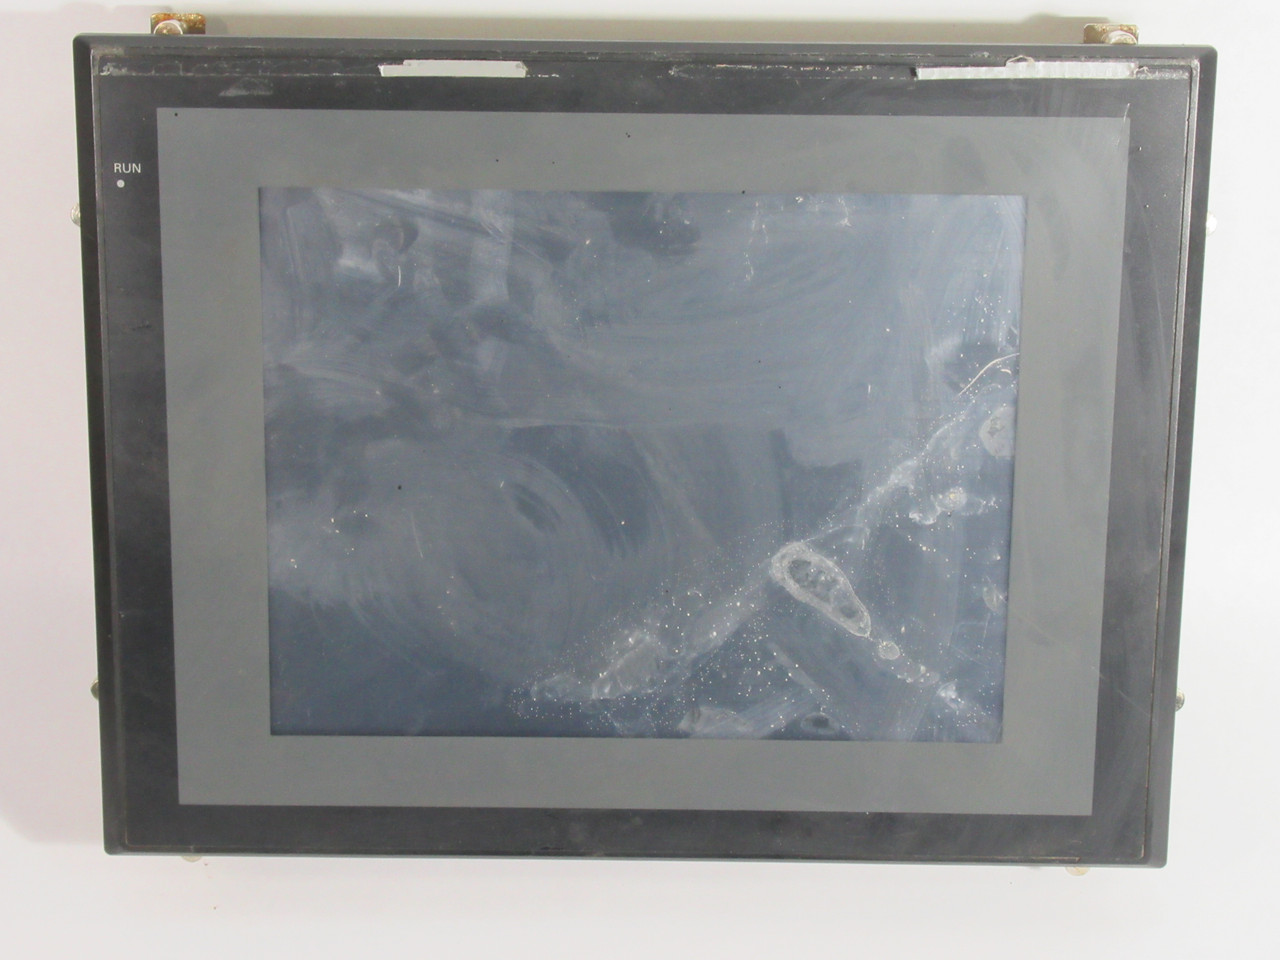 Omron NS10-TV01B-V2 Interactive Display *Dirt Under Screen Cover* ! AS IS !